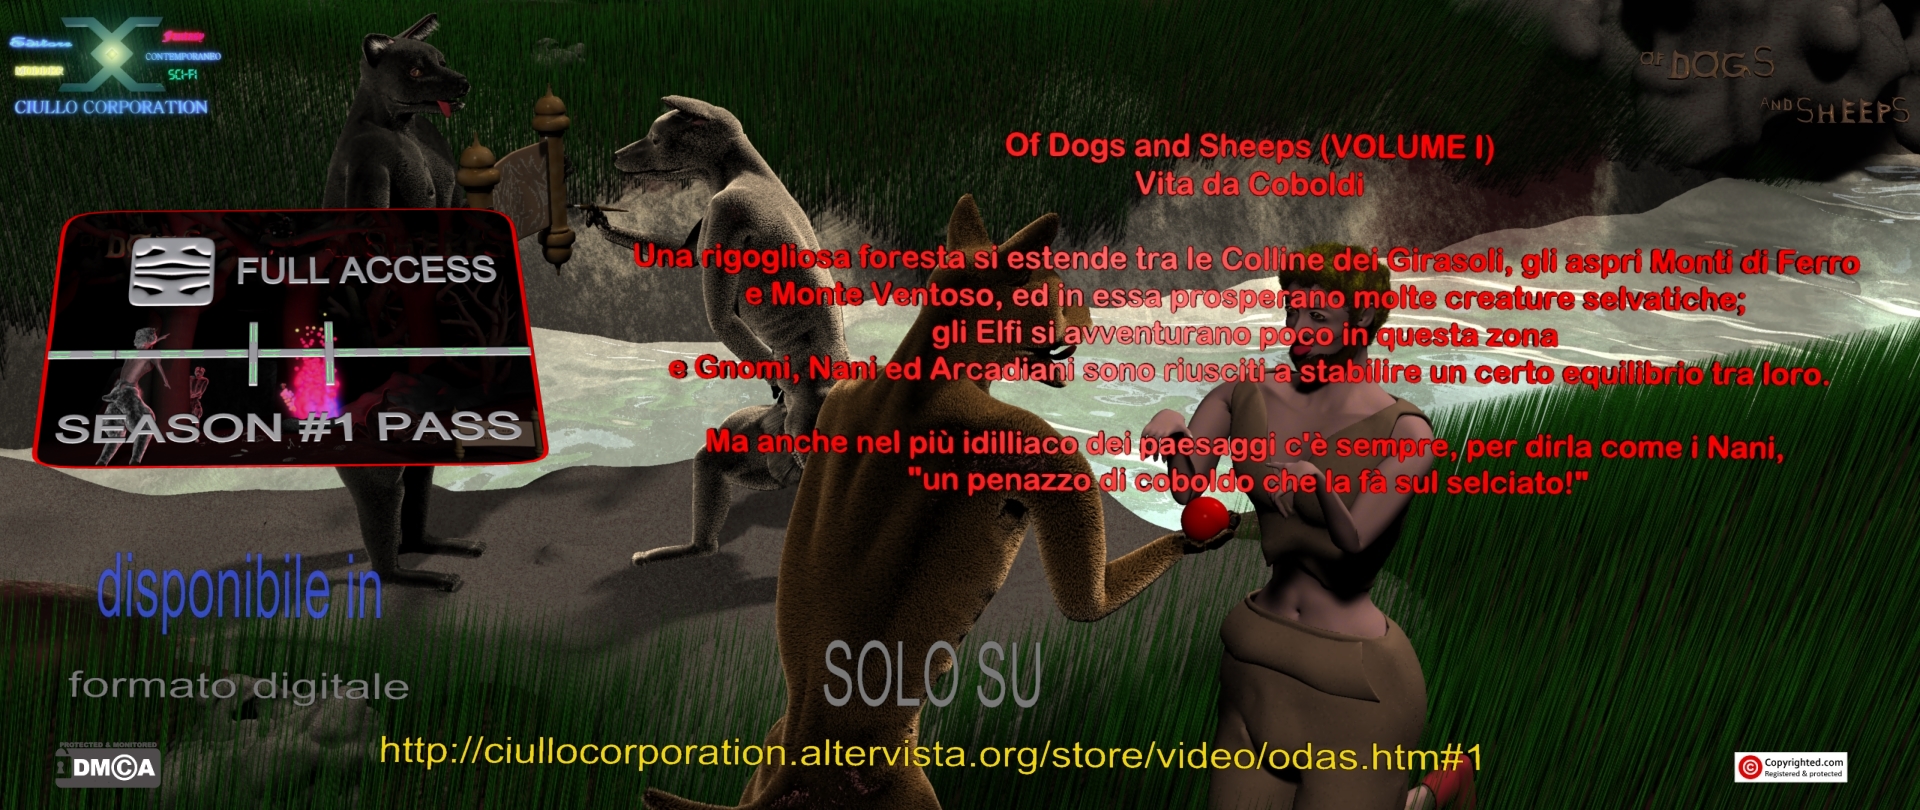 Of Dogs and Sheeps (VOLUME I - Episodio #1)